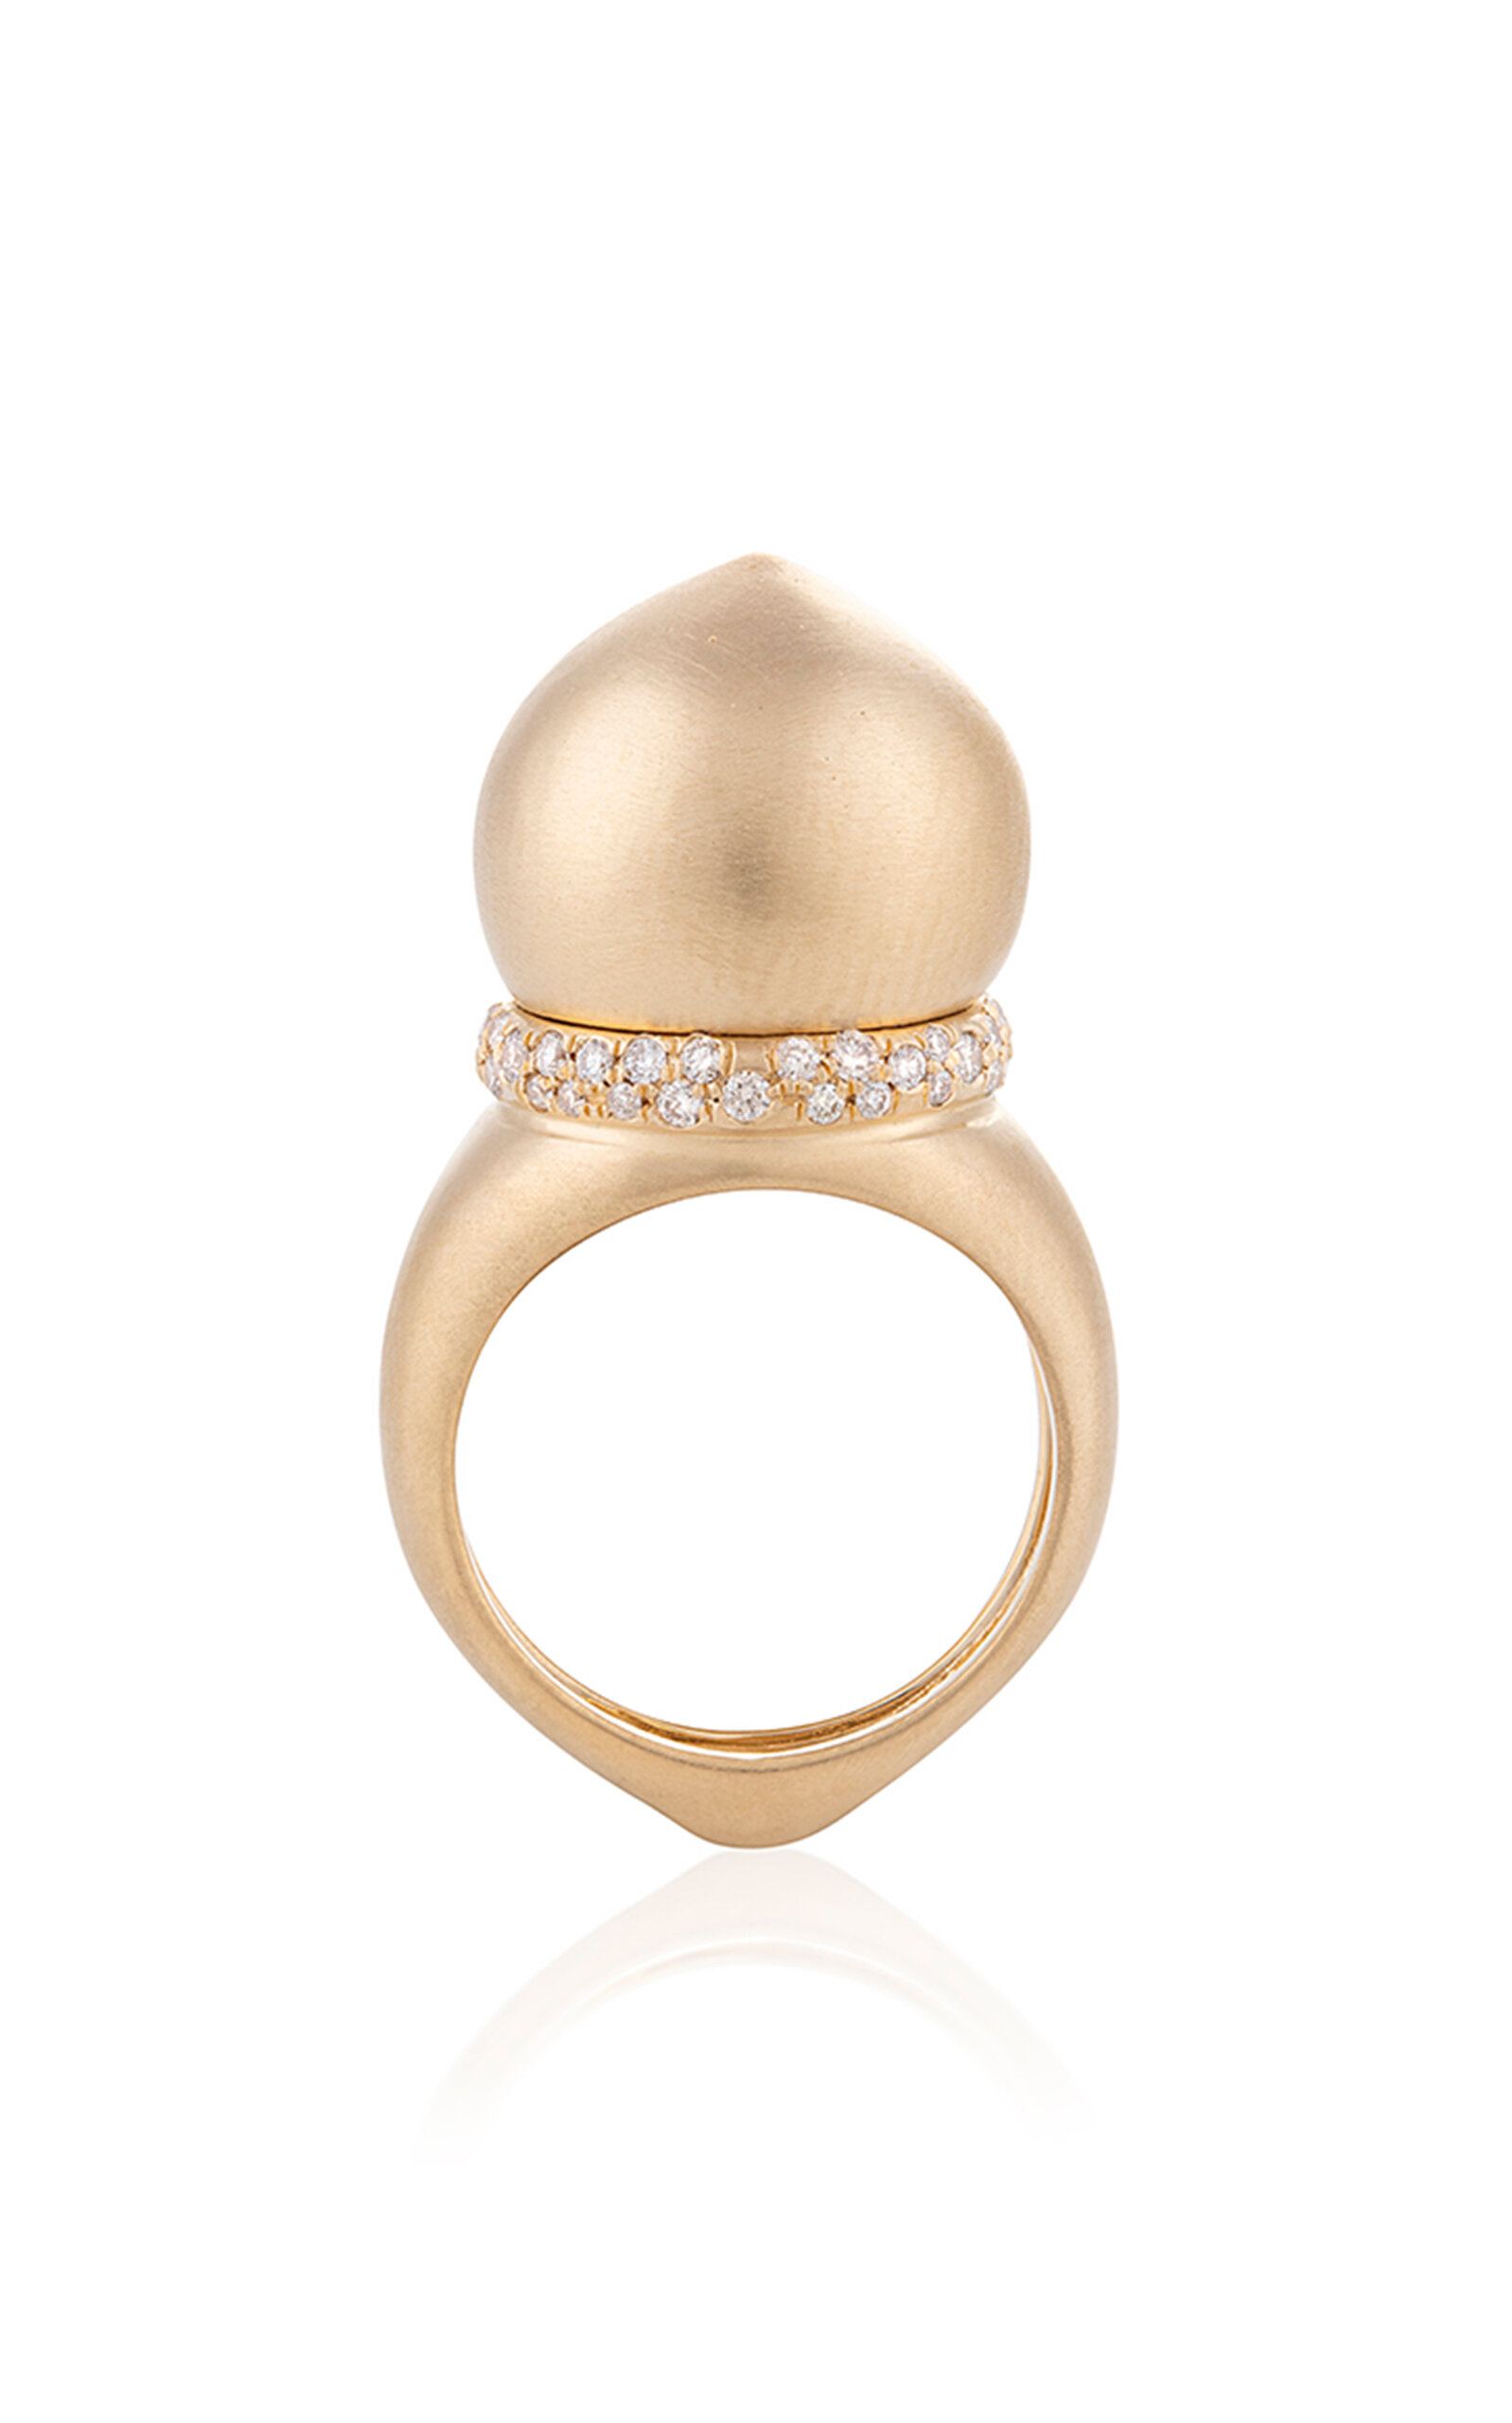 Nada Ghazal 18k Yellow Gold The Dome Courage Small Ring